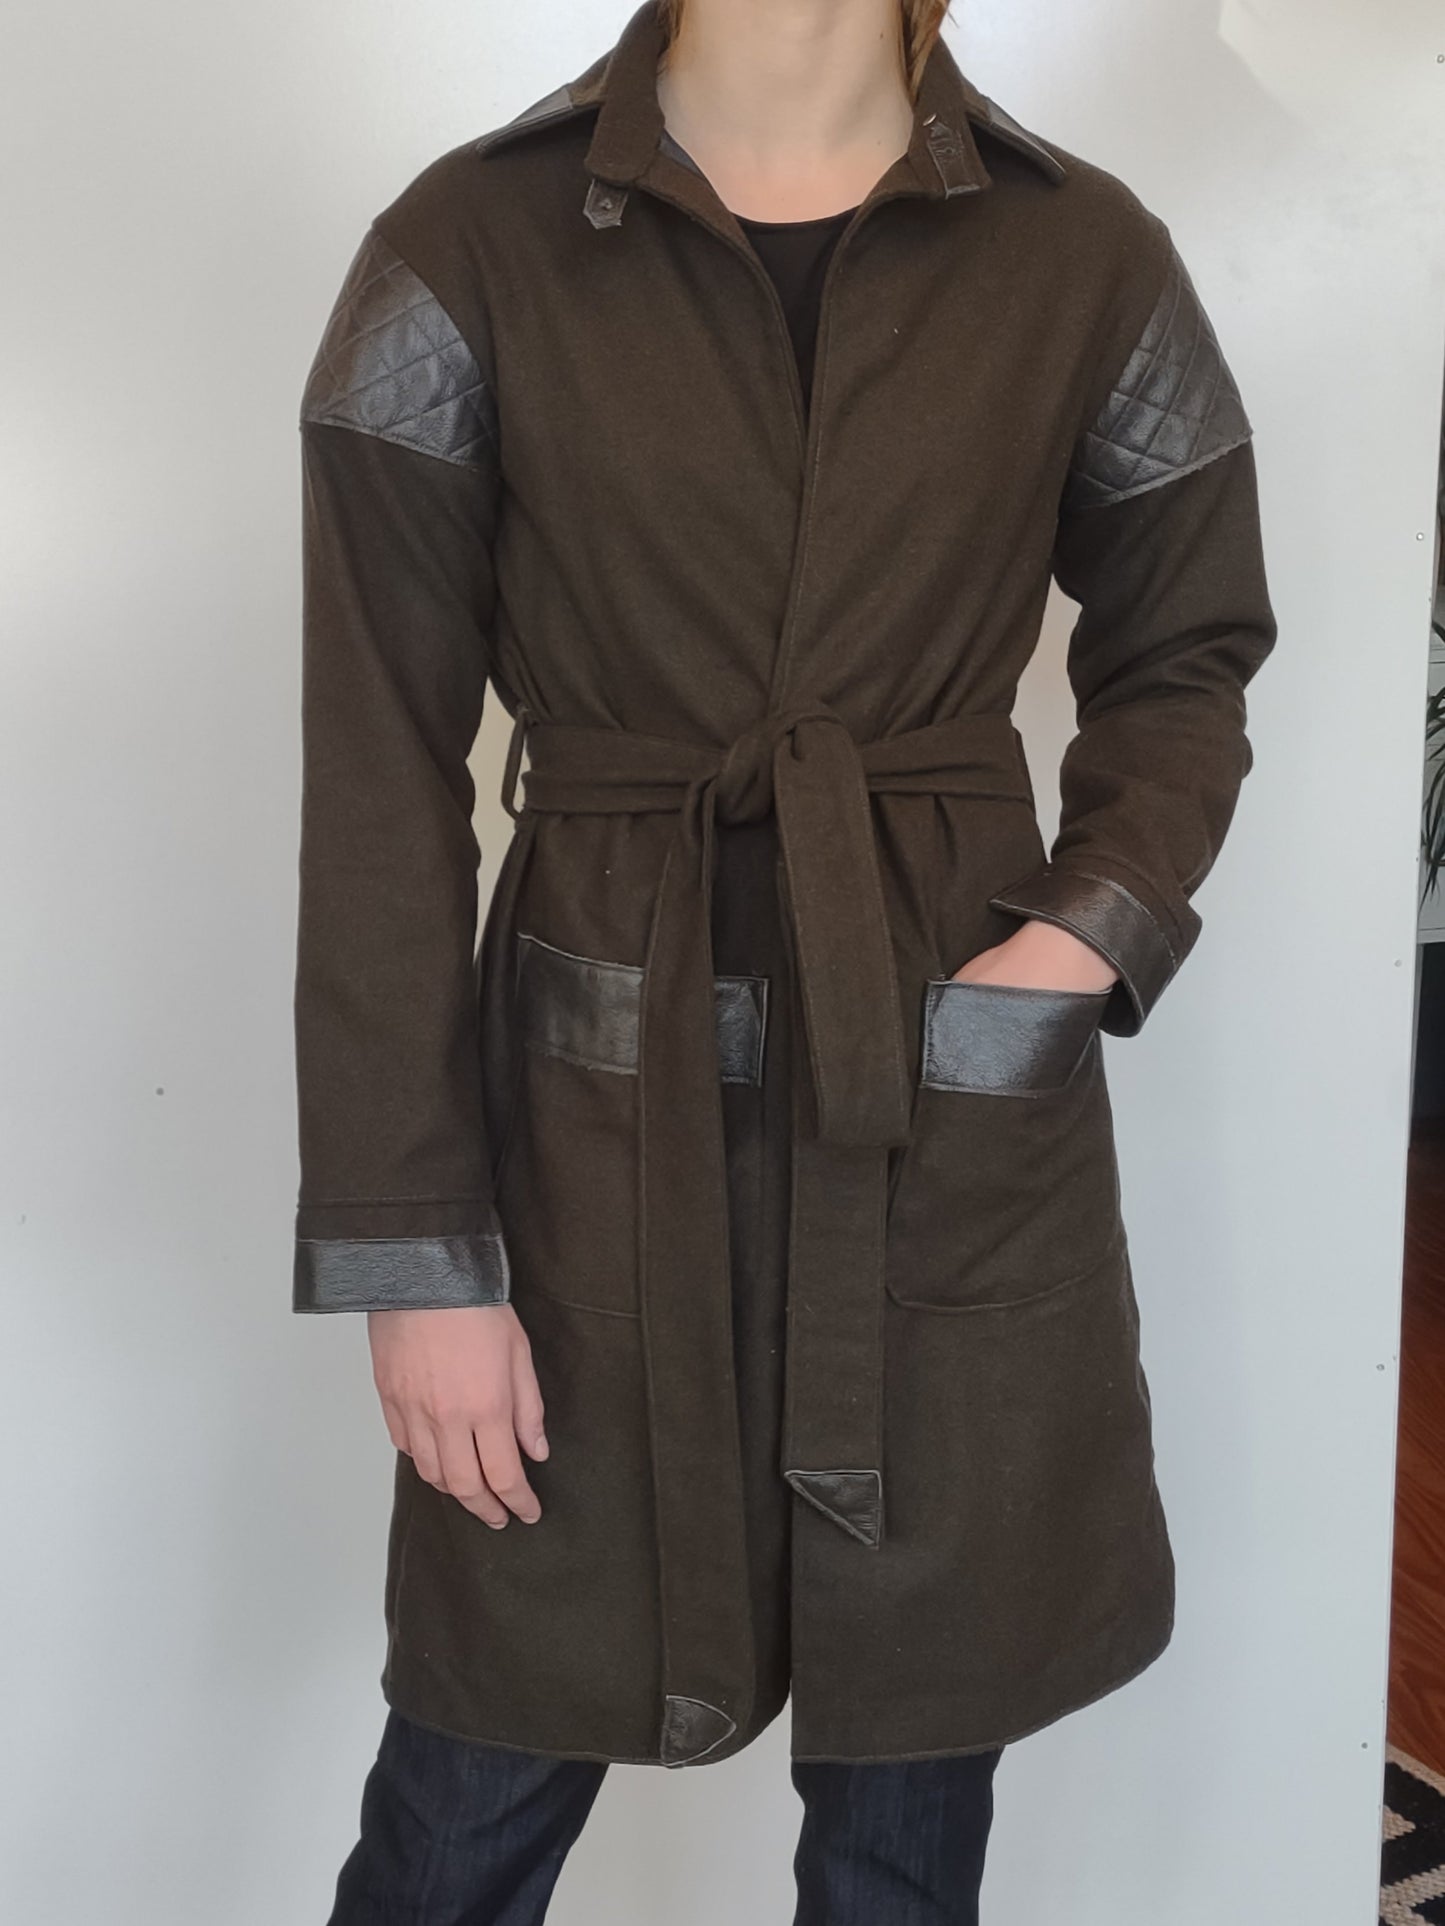 Dark Olive Deadstock Wool Car Coat with Leather Attachments and Belt